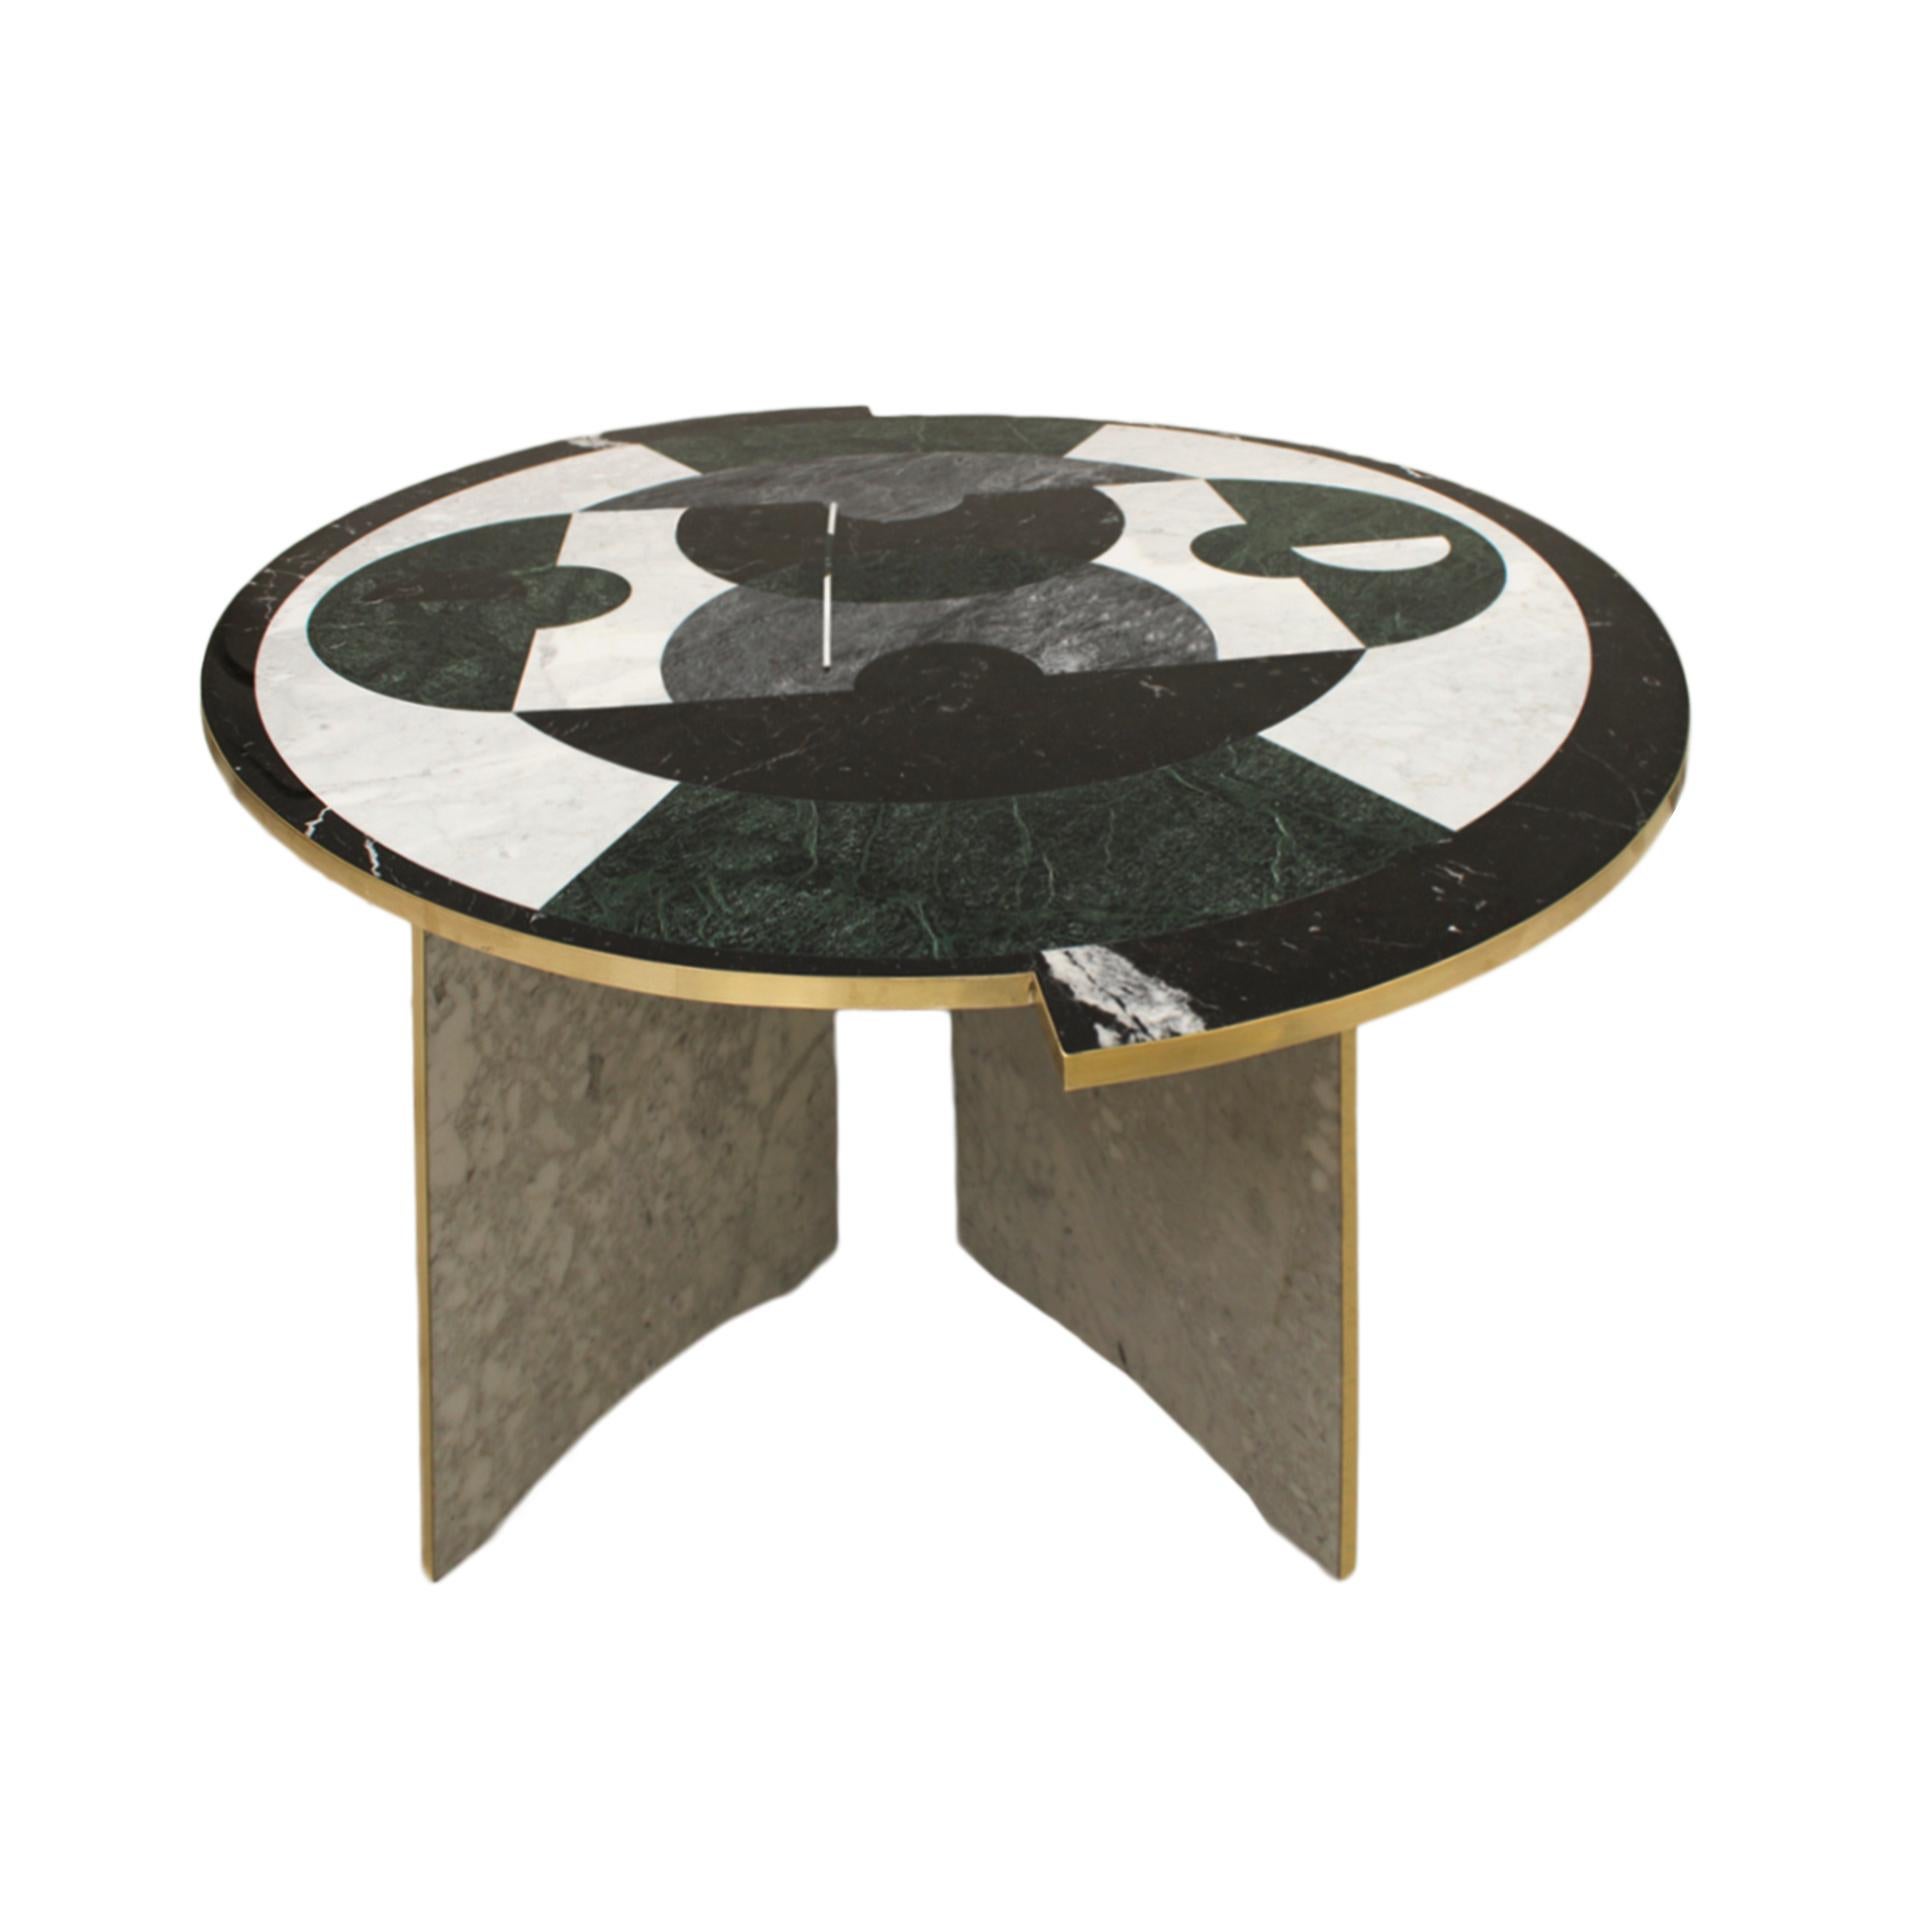 Mid century modern style round dining table / console table. Base composed of two sculptural pieces mixing different marbles and brass detaisl. Round top in white Carrara, black Marquina, Ruibina gray and India green marble. Designed by L.A. Studio.